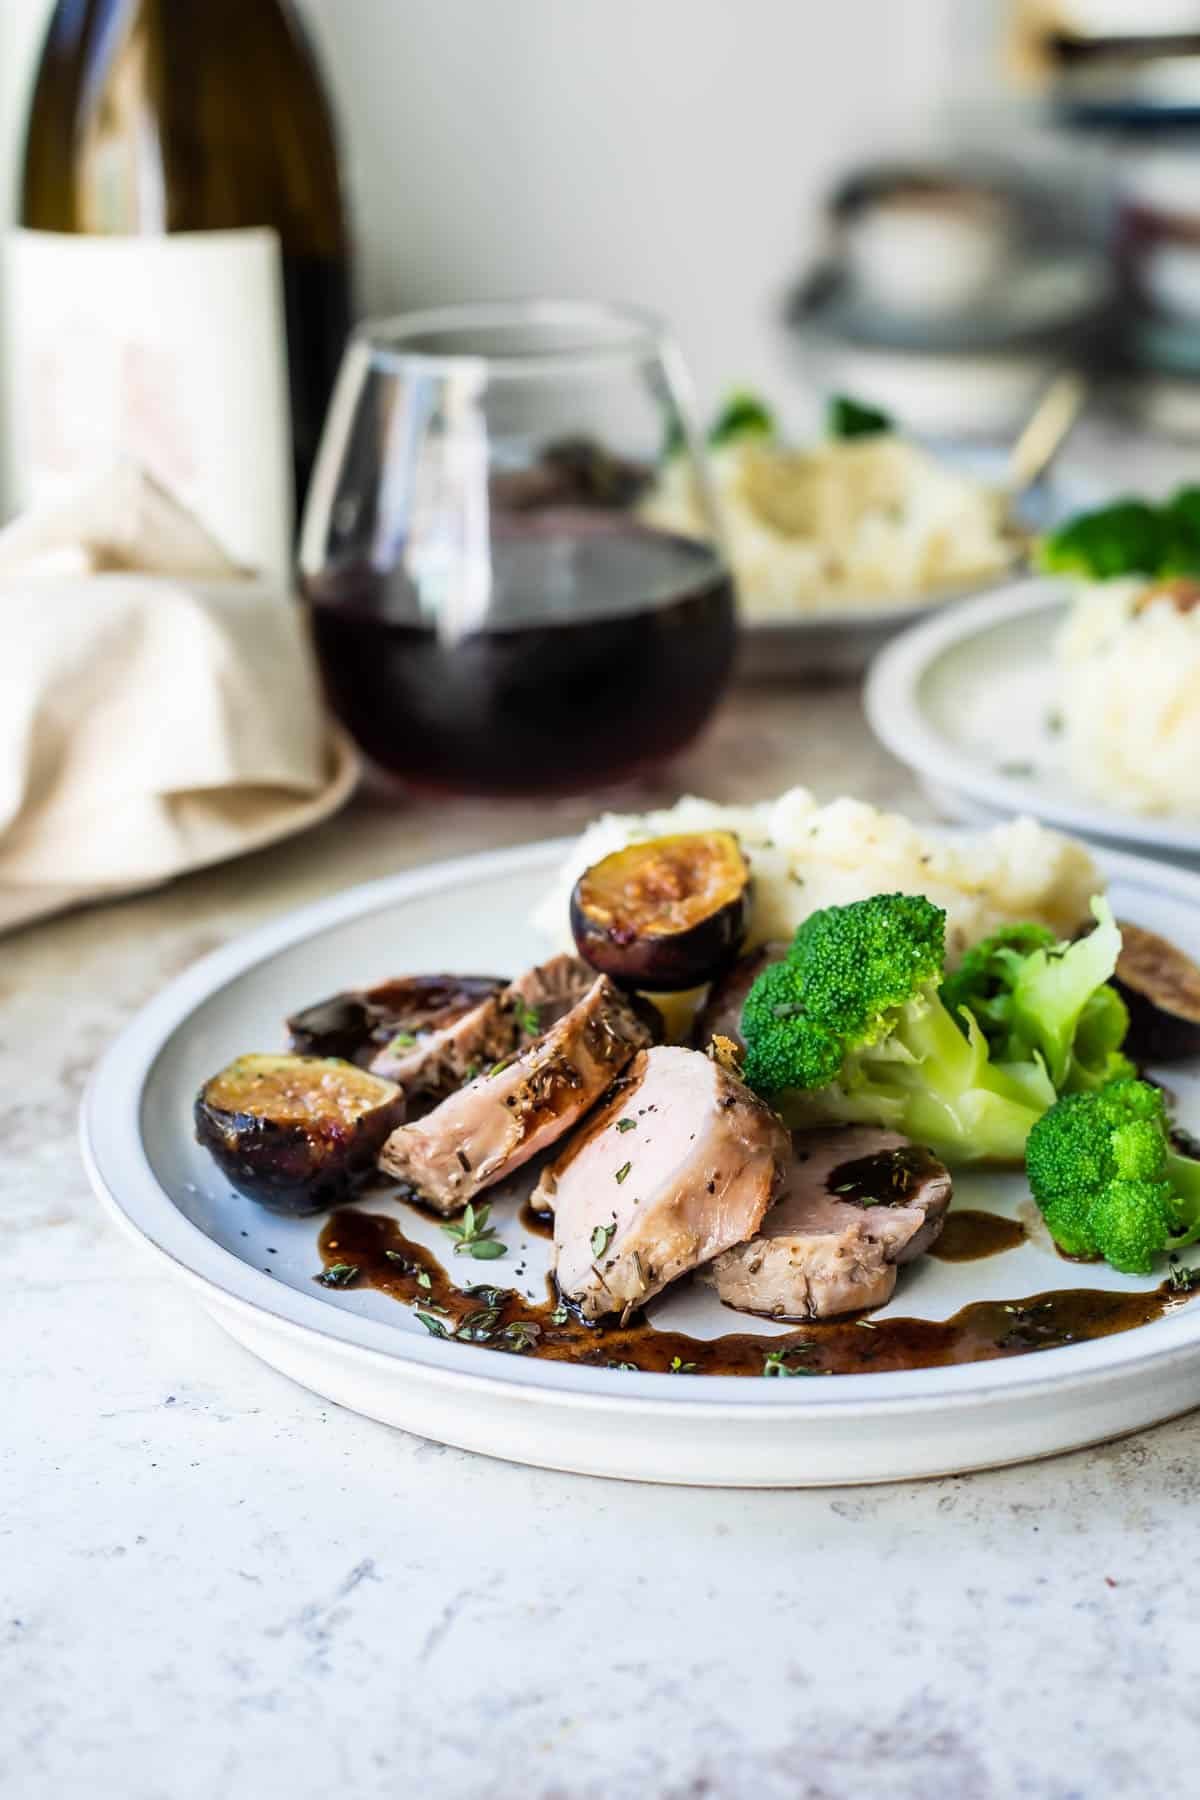 A plate with mashed potatoes, broccoli and pork tenderloin with figs.